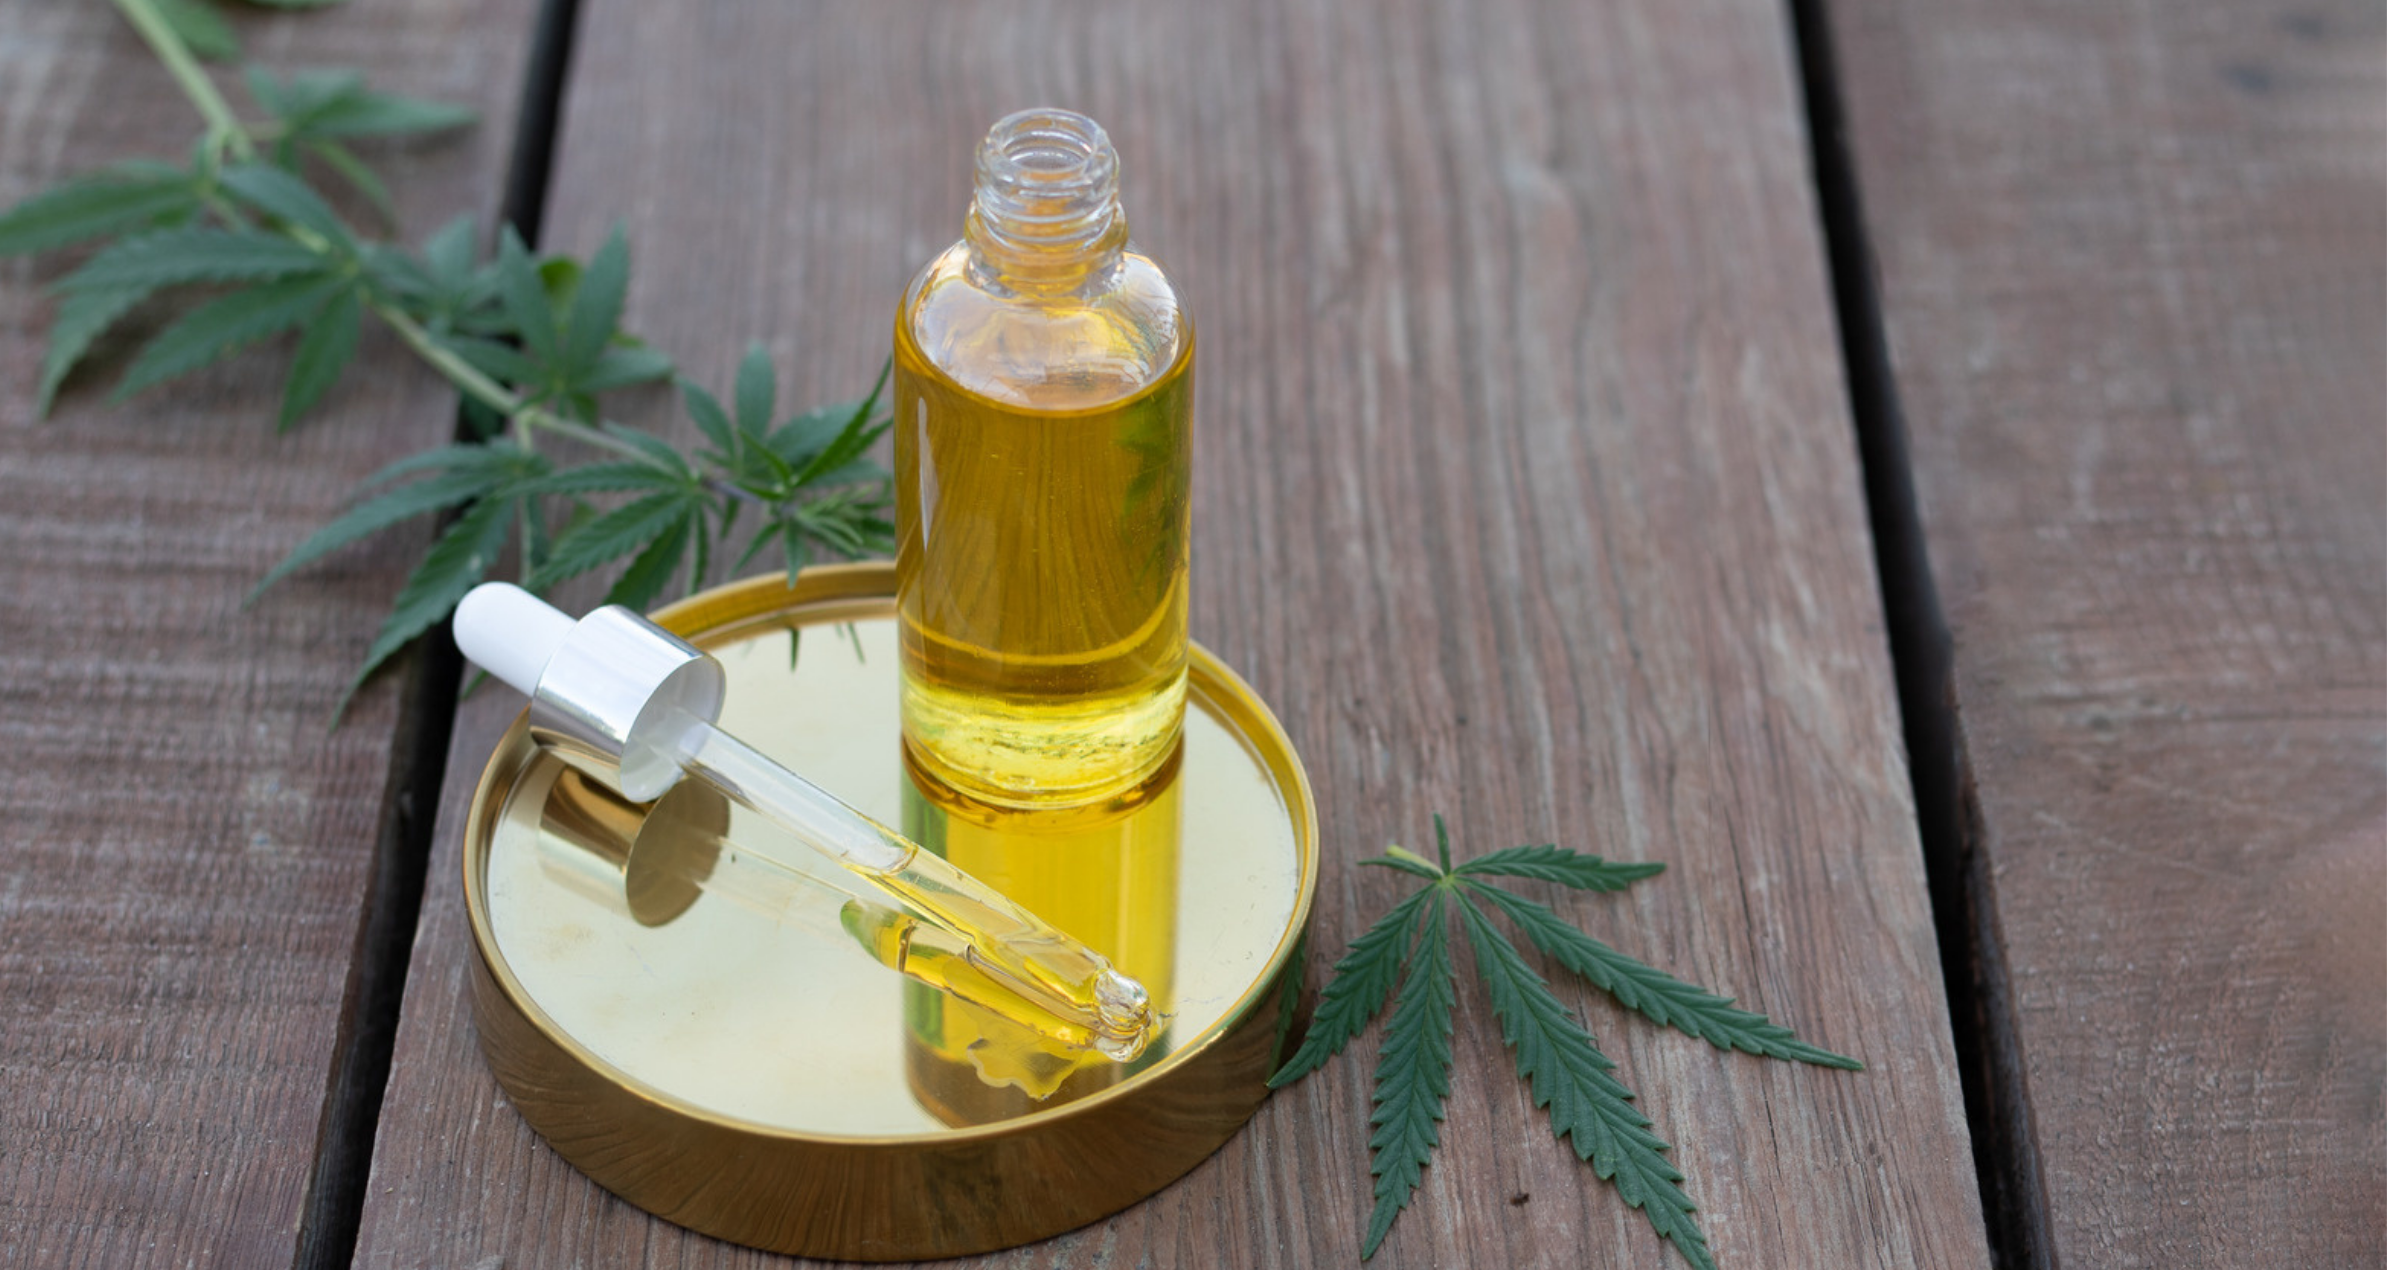 CBD and Massage: Are There Real Benefits, and Should You Try It? - Zeel